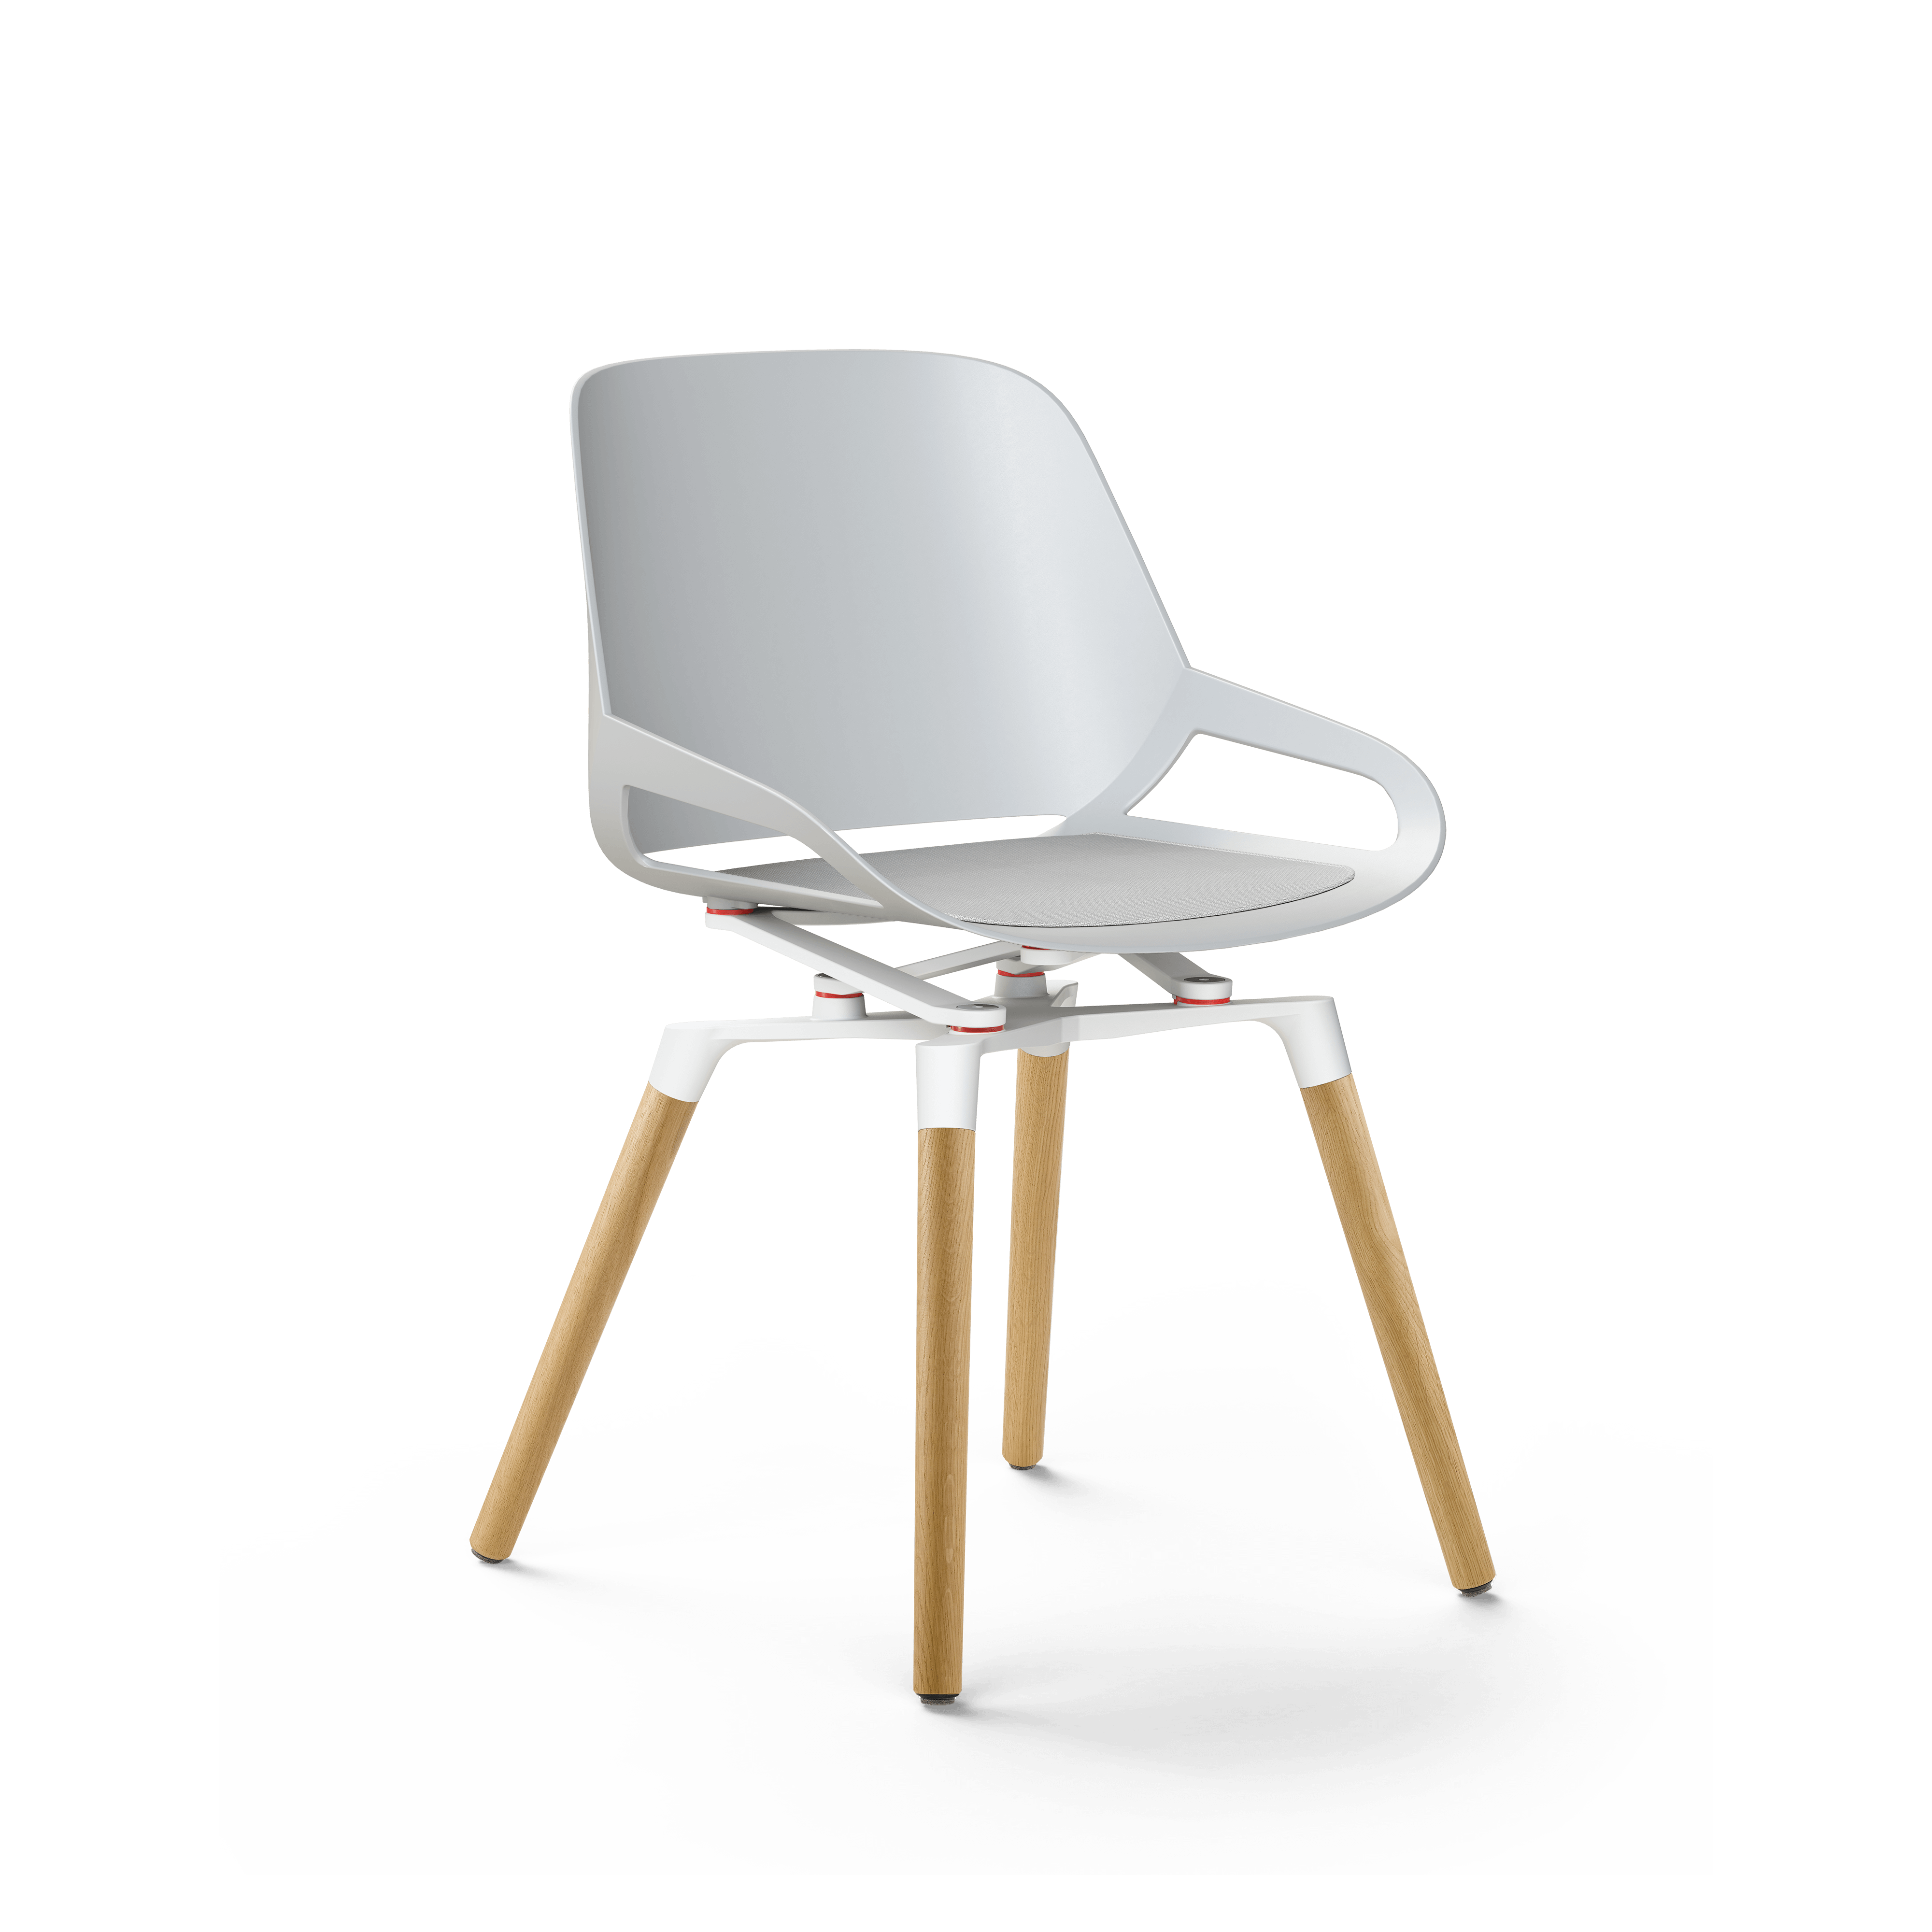 Design chair Aeris Numo with wooden legs, white shell and white kinematics.